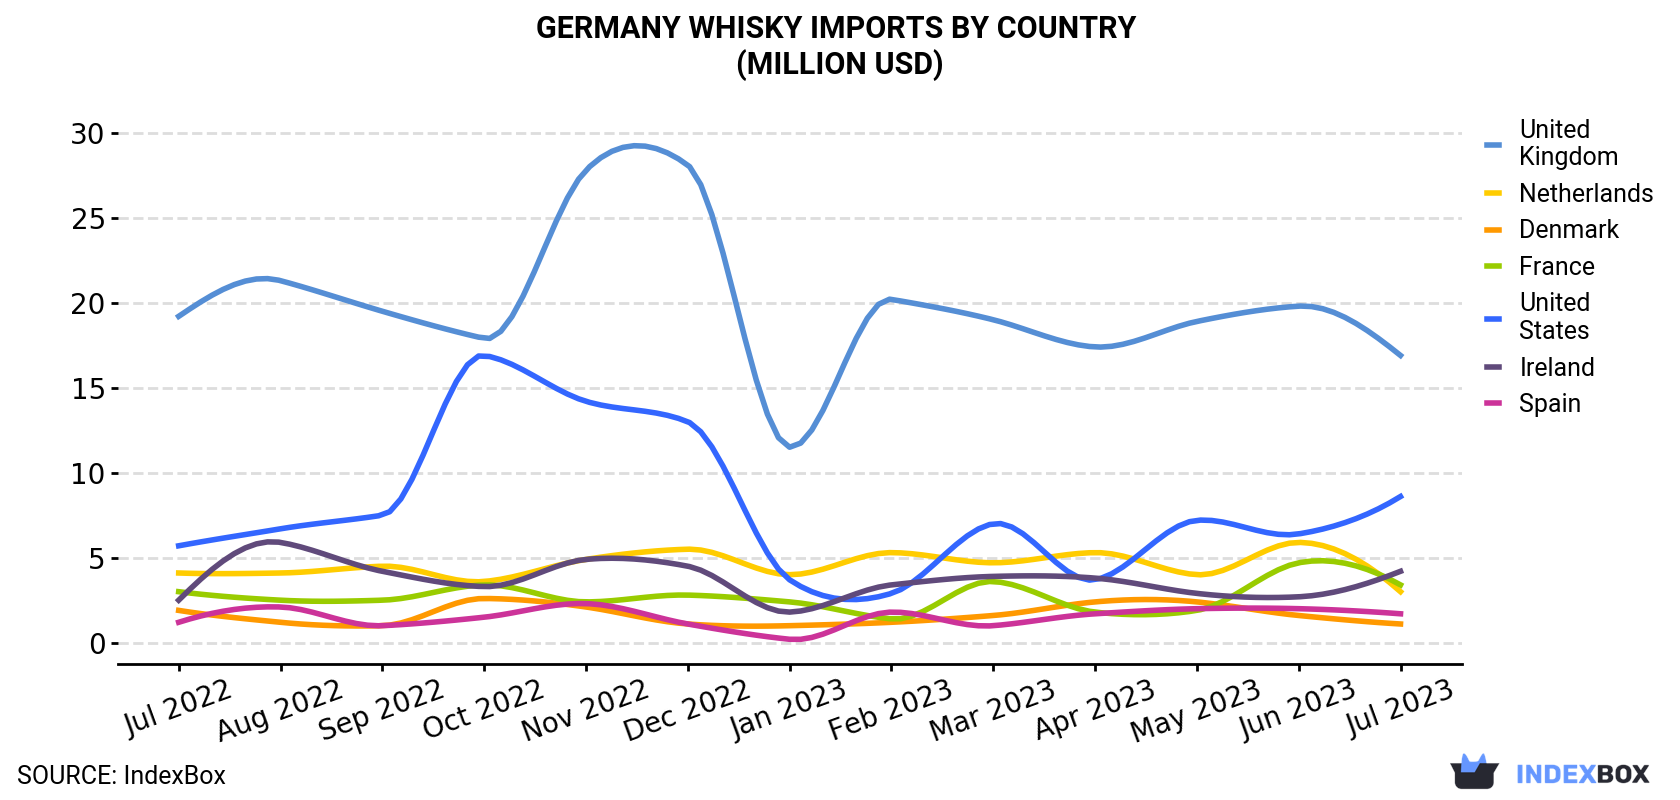 Germany Whisky Imports By Country (Million USD)